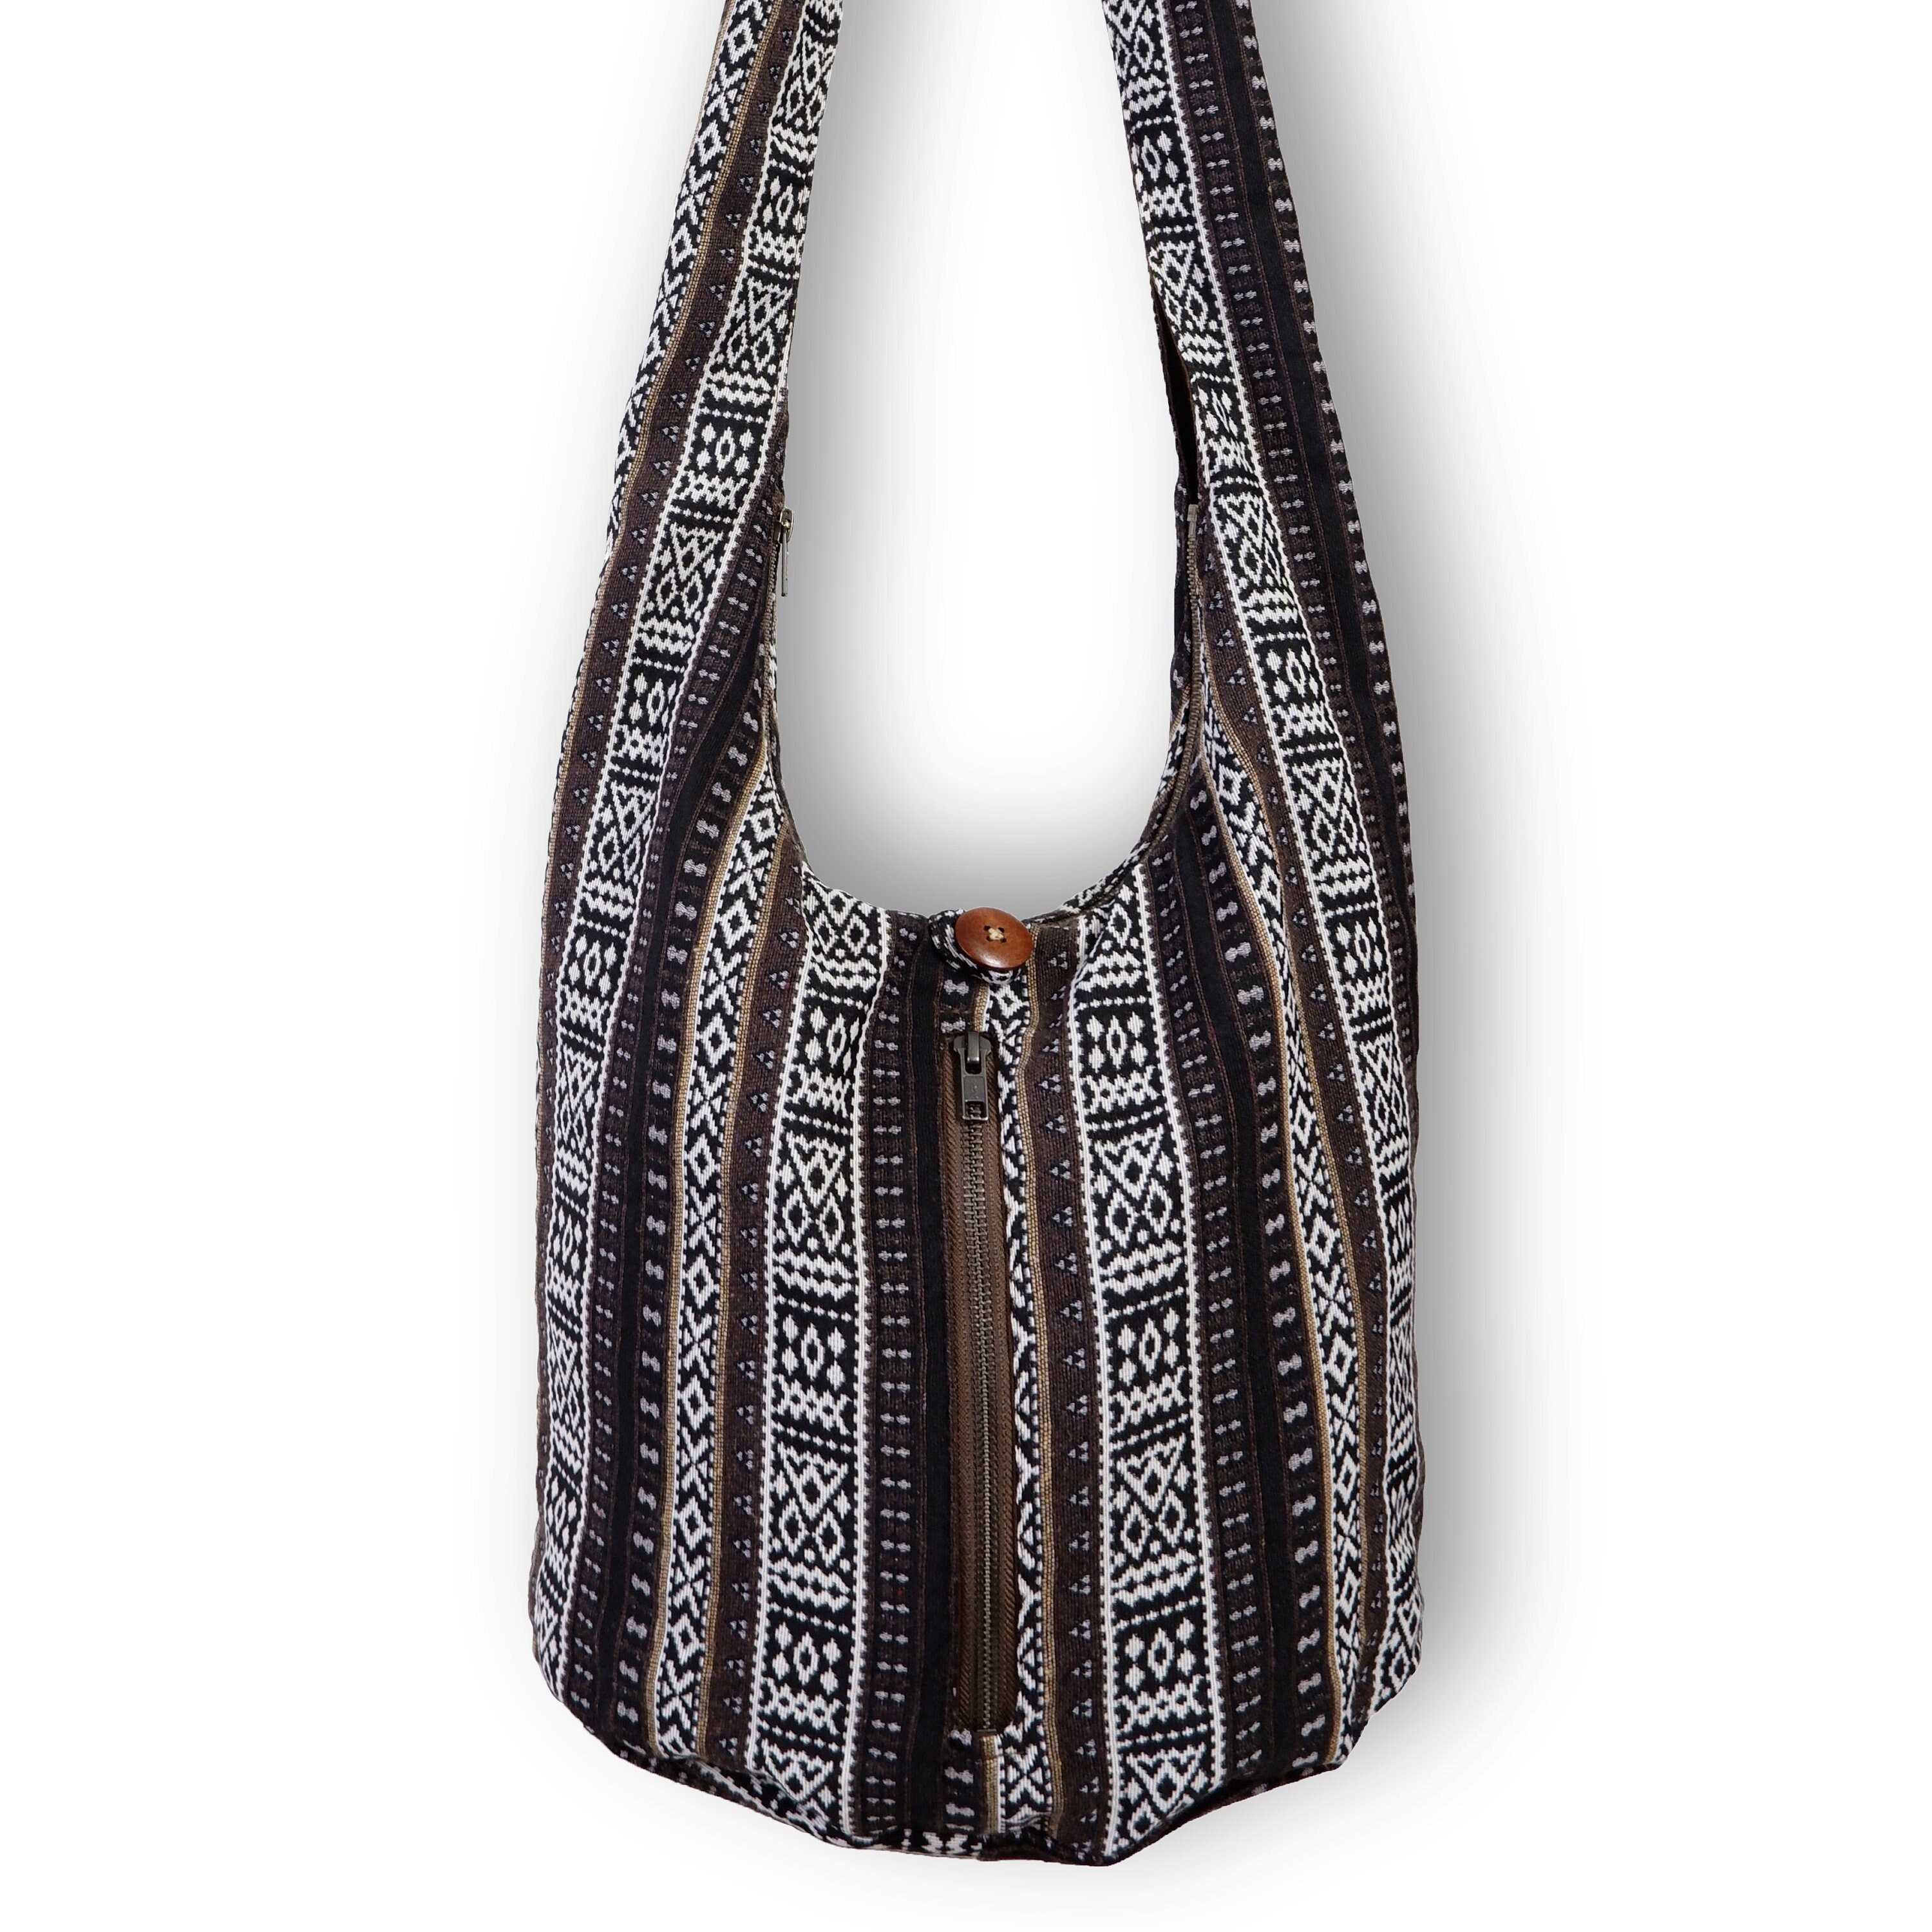 Womens Fabric Boho Handbags With Fringe Hippie Shoulder Bags For Women –  igemstonejewelry